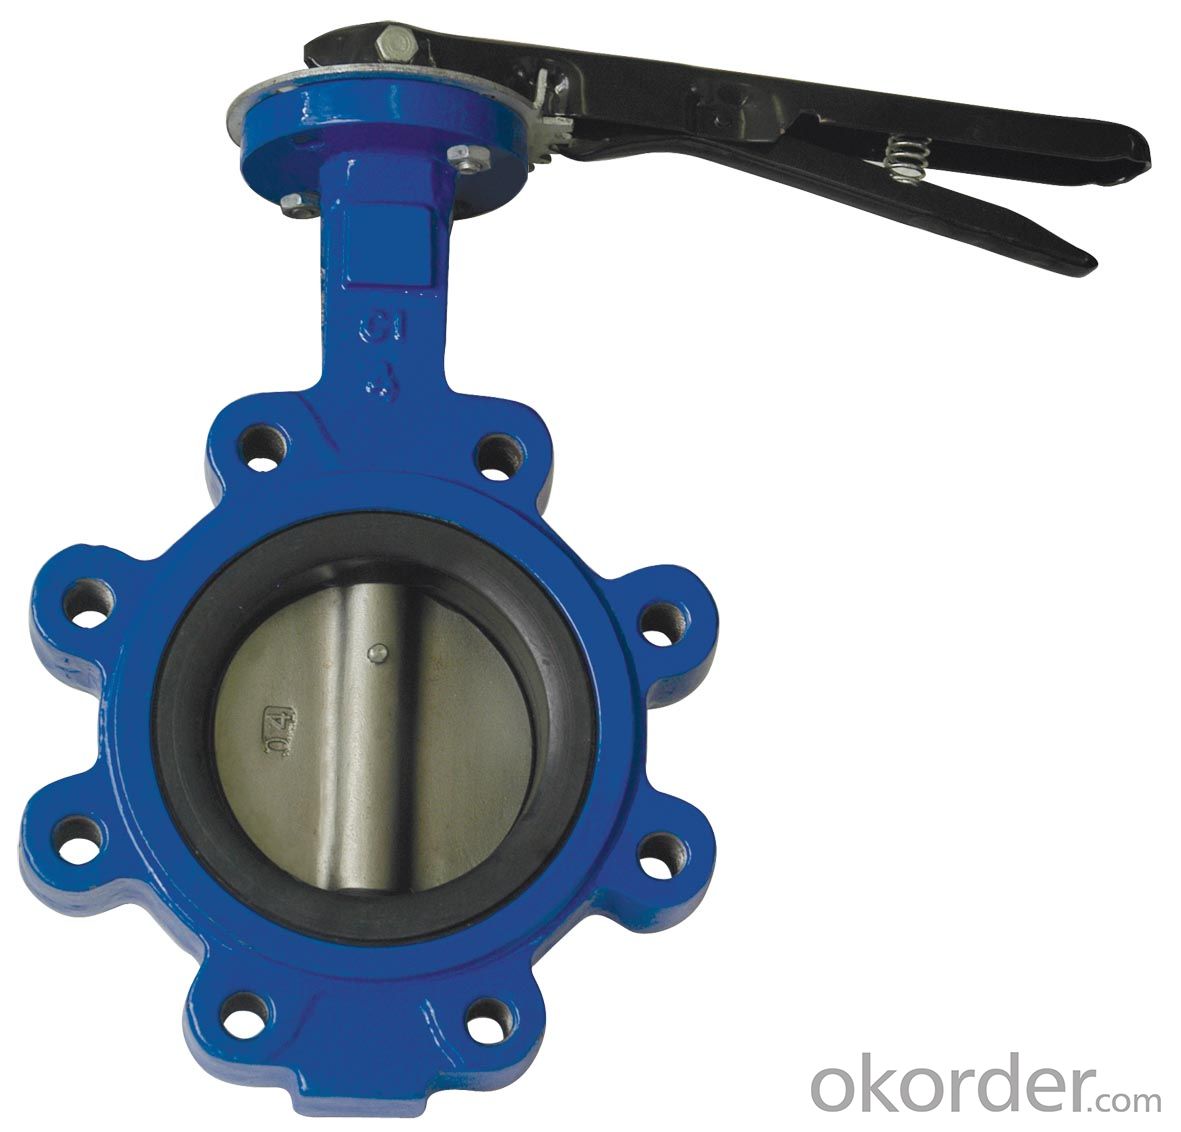 Pneumatic Double Flange Butterfly Valve Made In China